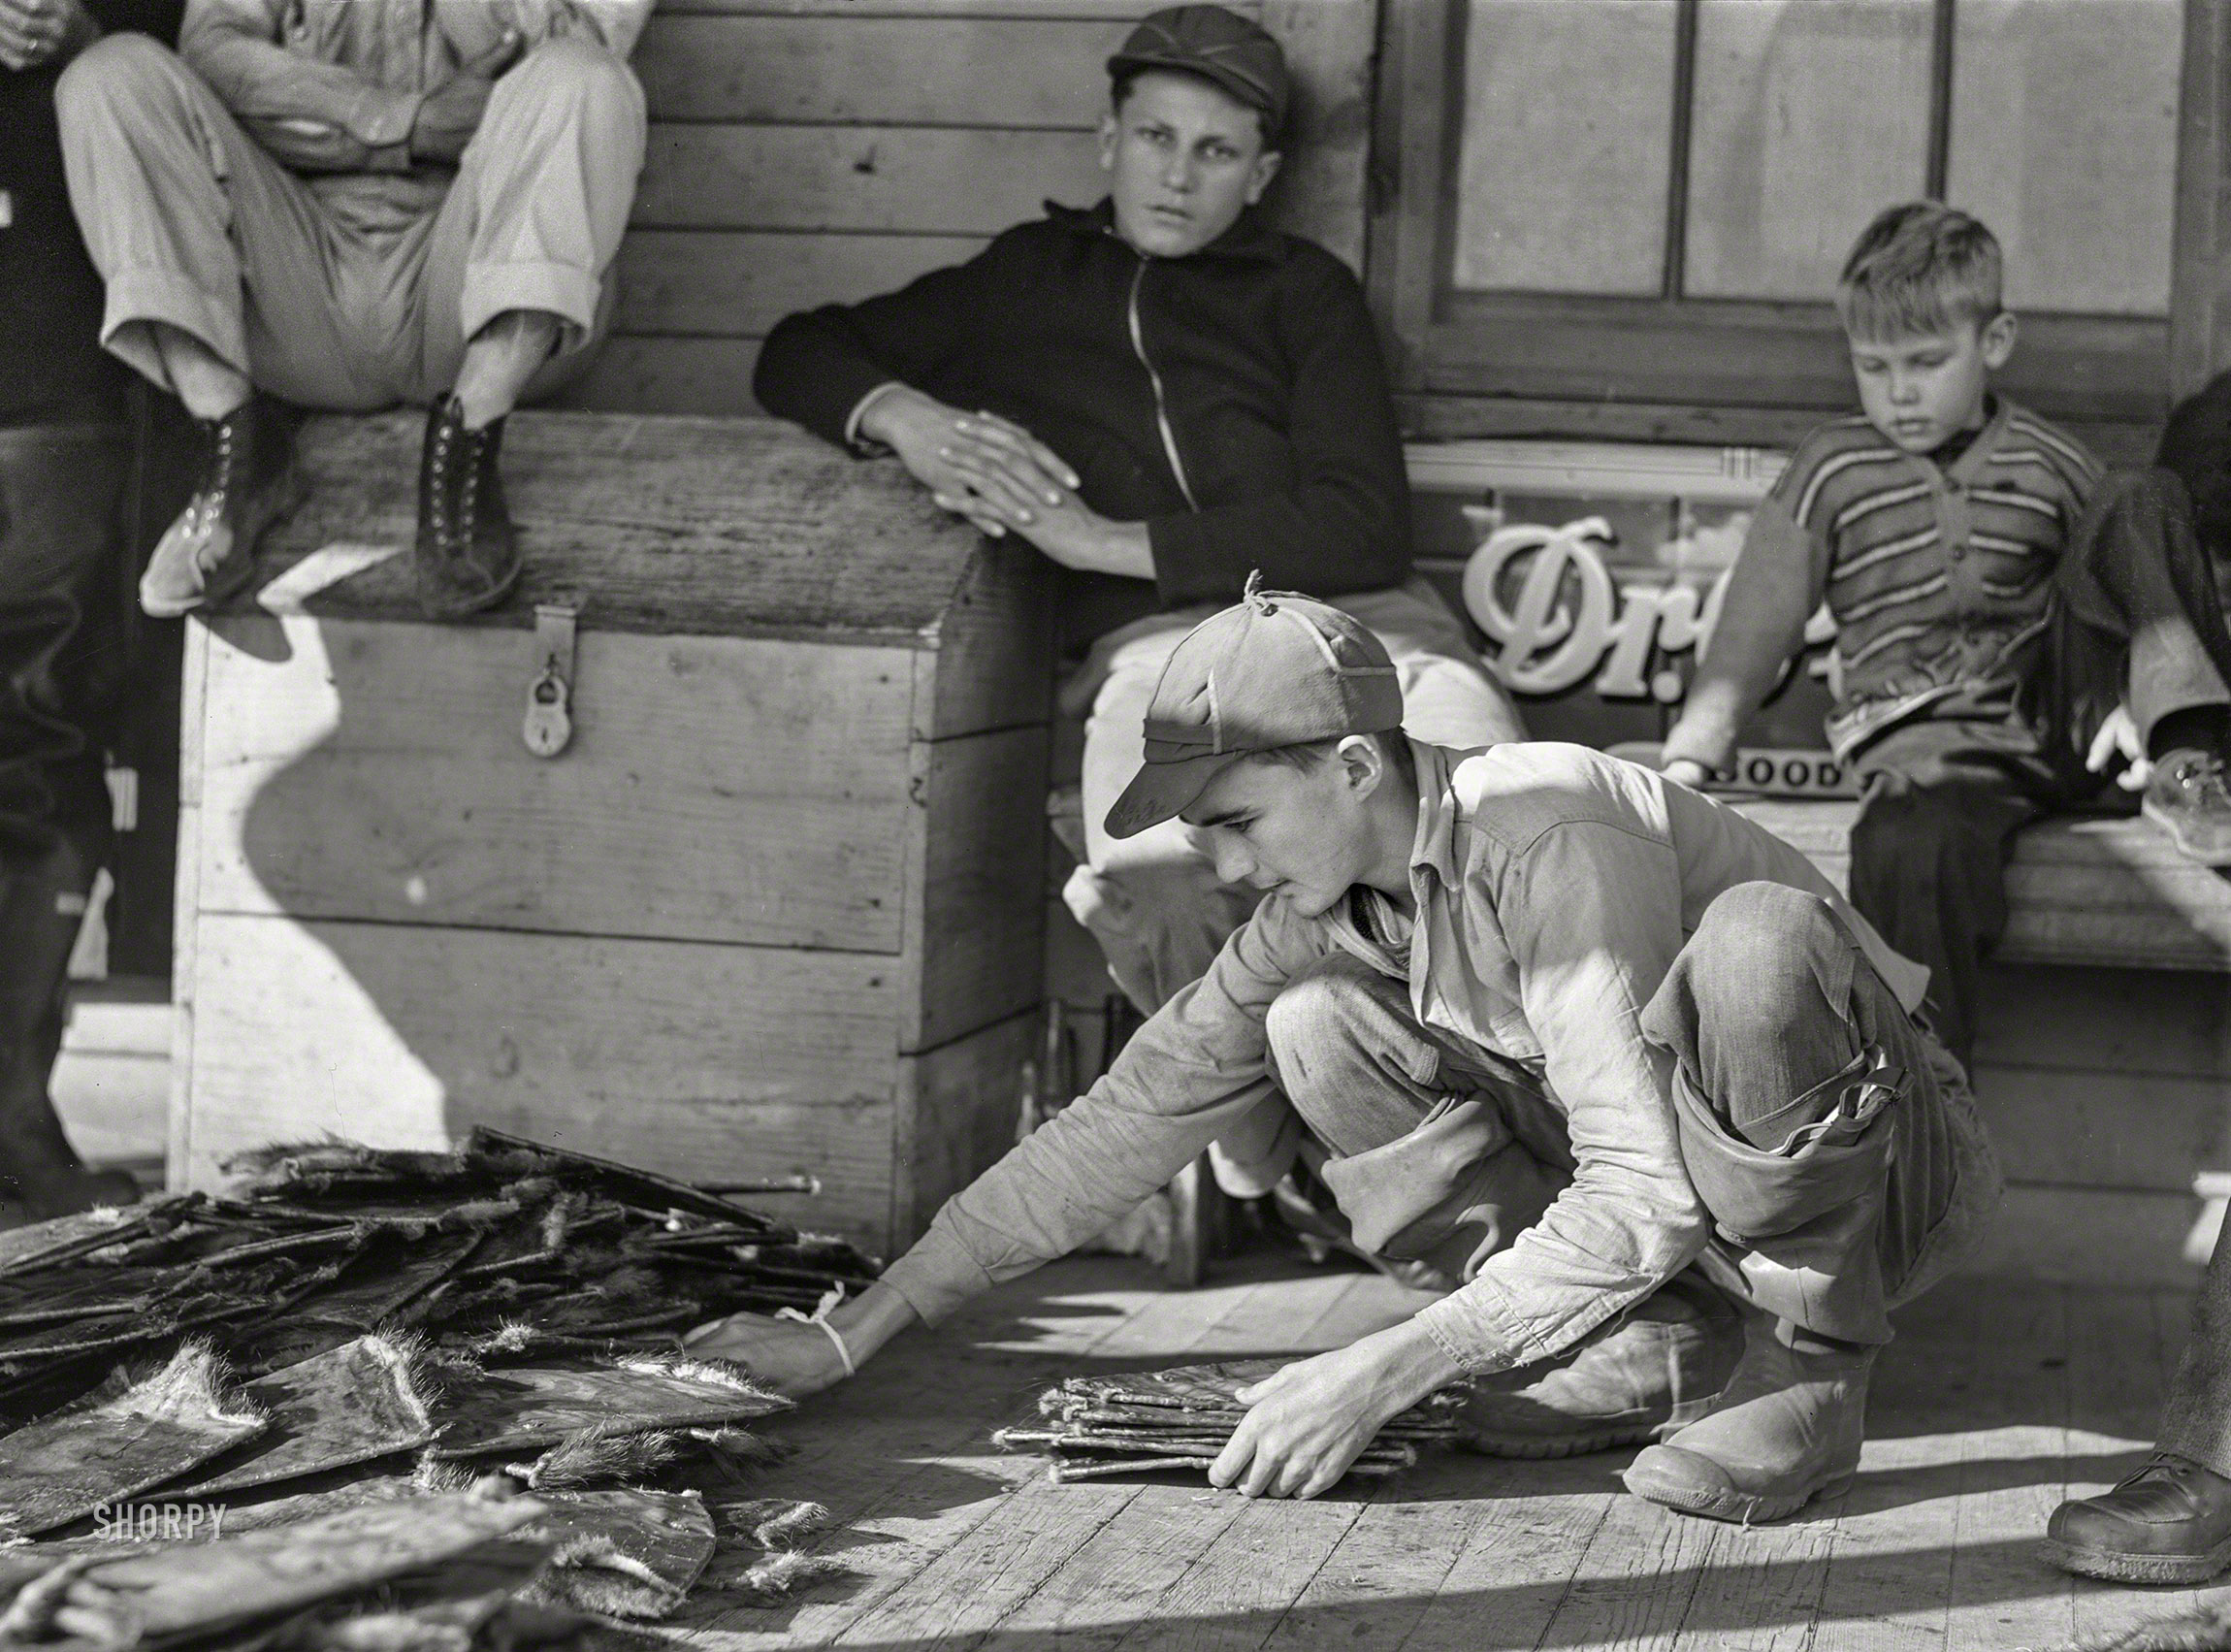 January 1941. "Grading muskrats while fur buyers and Spanish trappers look on during auction sale on porch of community store in Saint Bernard, Louisiana." Medium format negative by Marion Post Wolcott for the Farm Security Administration. View full size.